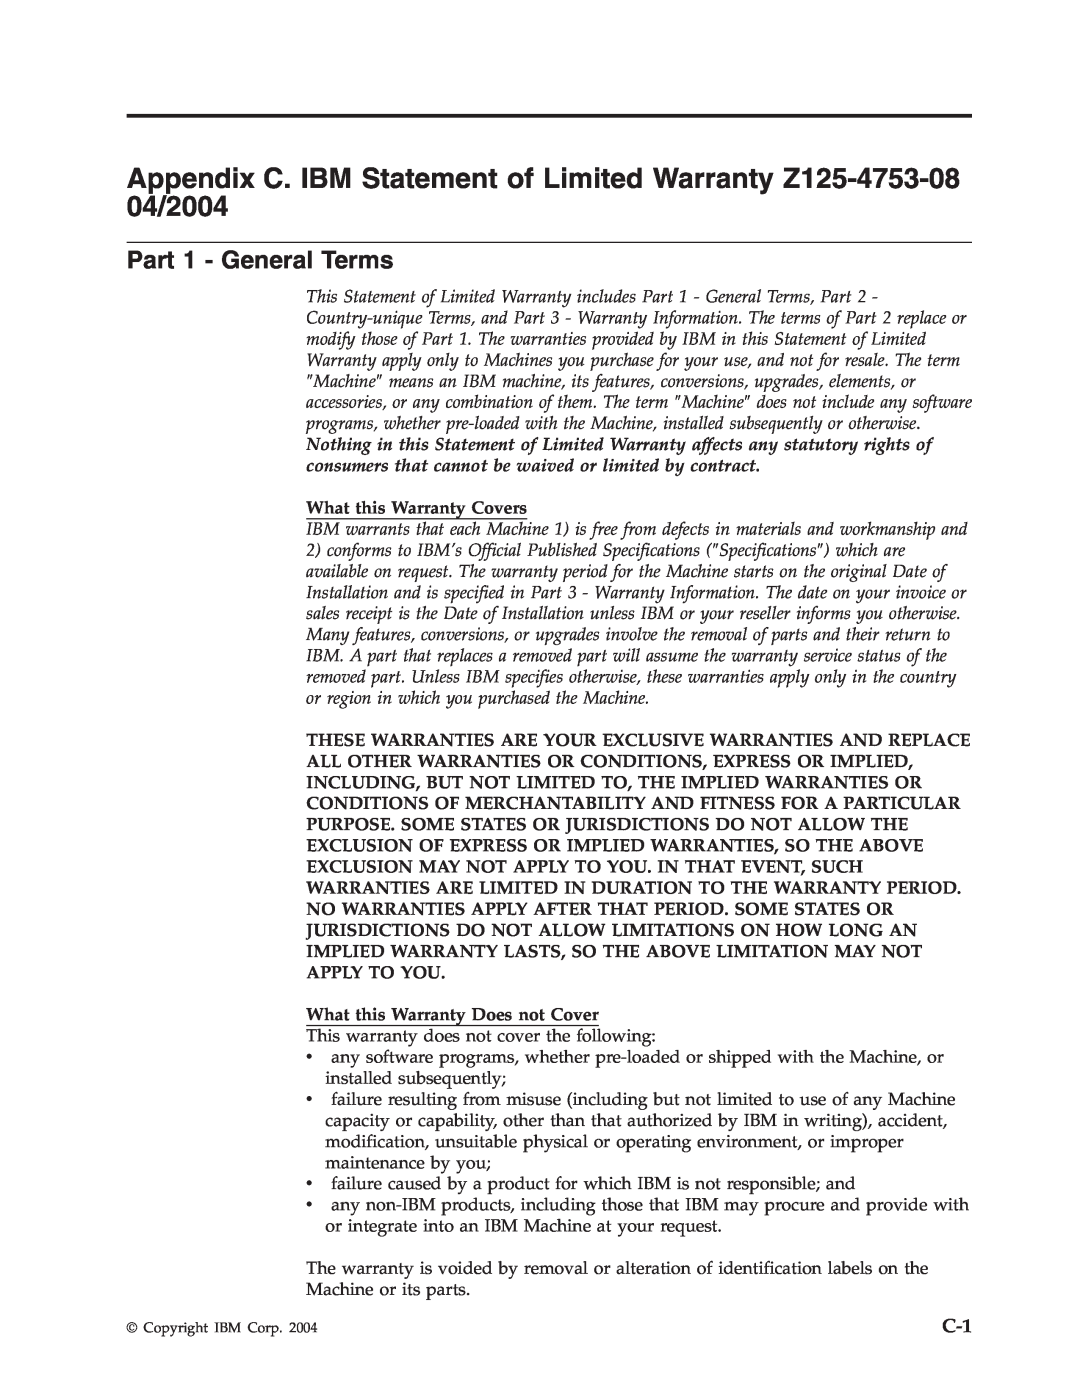 IBM 73P4518 manual Appendix C. IBM Statement of Limited Warranty Z125-4753-08 04/2004, Part 1 - General Terms 